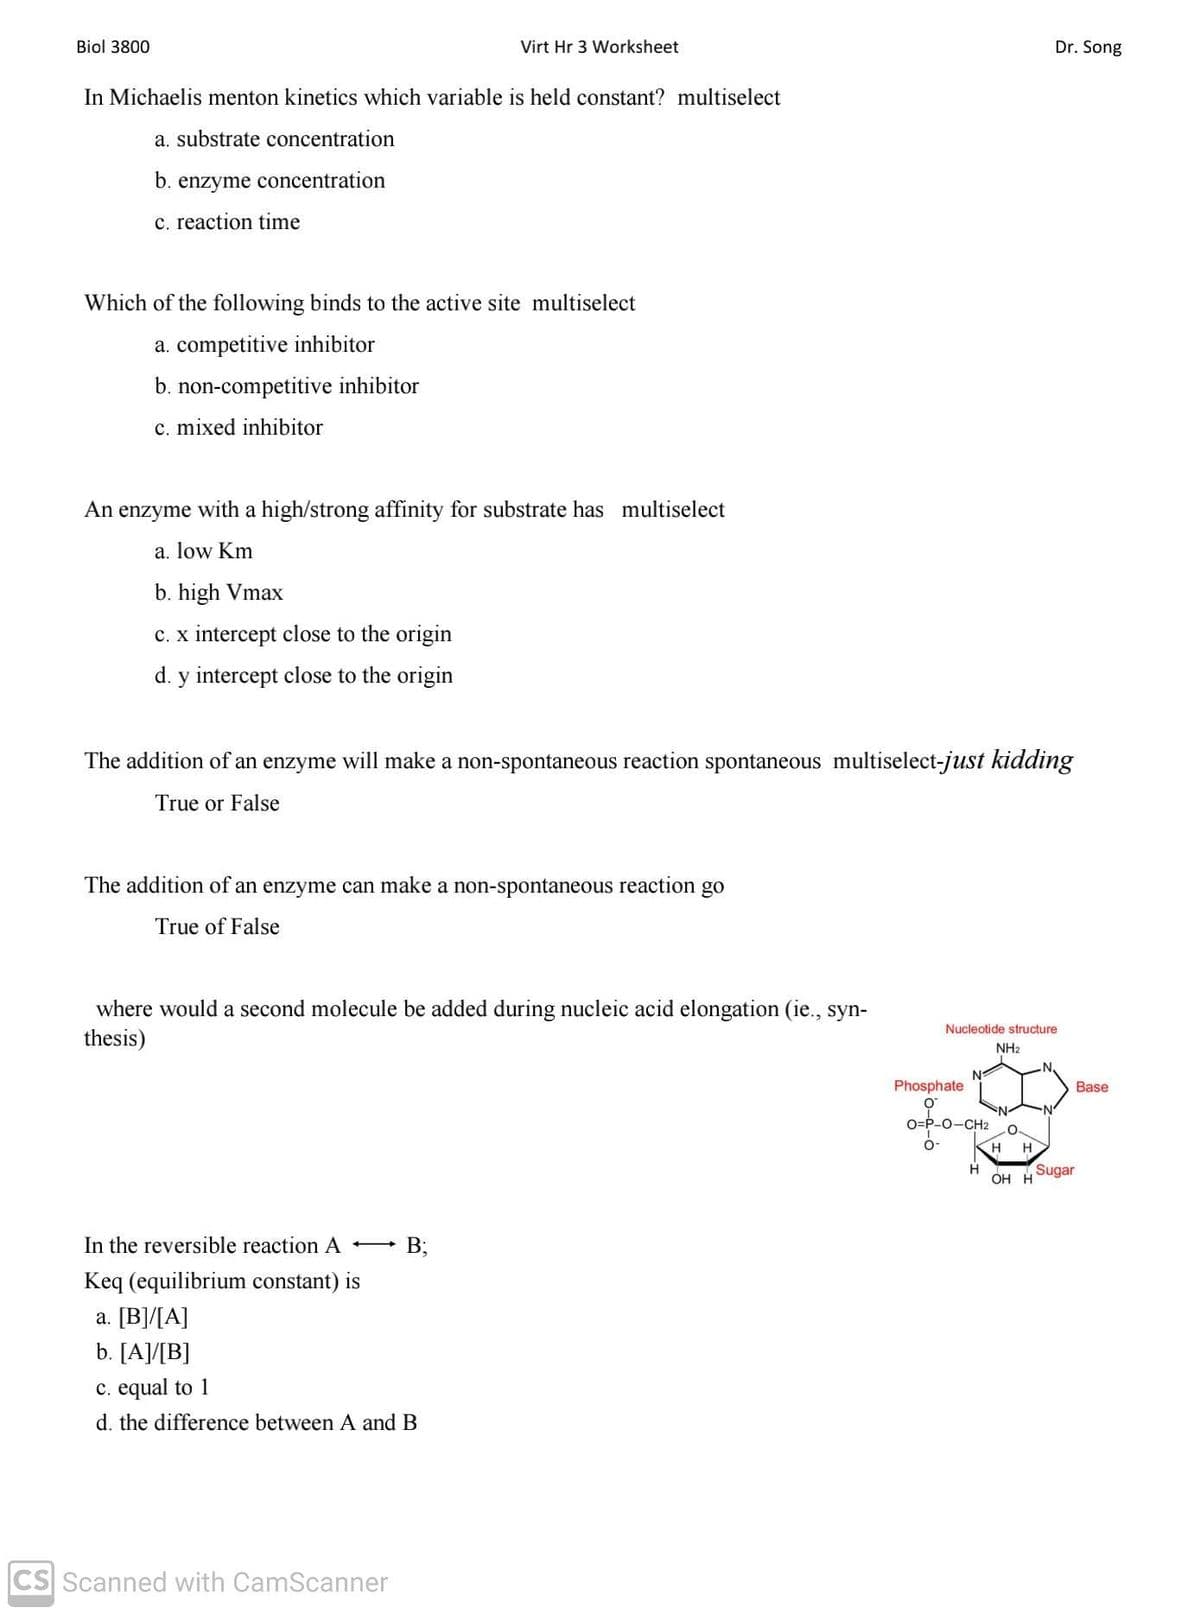 Biol 3800
Virt Hr 3 Worksheet
Dr. Song
In Michaelis menton kinetics which variable is held constant? multiselect
a. substrate concentration
b.
enzyme concentration
c. reaction time
Which of the following binds to the active site multiselect
a. competitive inhibitor
b. non-competitive inhibitor
c. mixed inhibitor
An enzyme with a high/strong affinity for substrate has multiselect
a. low Km
b. high Vmax
c. x intercept close to the origin
d. y intercept close to the origin
The addition of an enzyme will make a non-spontaneous reaction spontaneous multiselect-just kidding
True or False
The addition of an enzyme can make a non-spontaneous reaction go
True of False
where would a second molecule be added during nucleic acid elongation (ie., syn-
Nucleotide structure
thesis)
NH2
Phosphate
Base
O=P-0-CH2
H
H
H
ОН Н
Sugar
In the reversible reaction A -
- B;
Keq (equilibrium constant) is
a. [B]/[A]
b. [A]/[B]
c. equal to 1
d. the difference between A and B
CS Scanned with CamScanner
